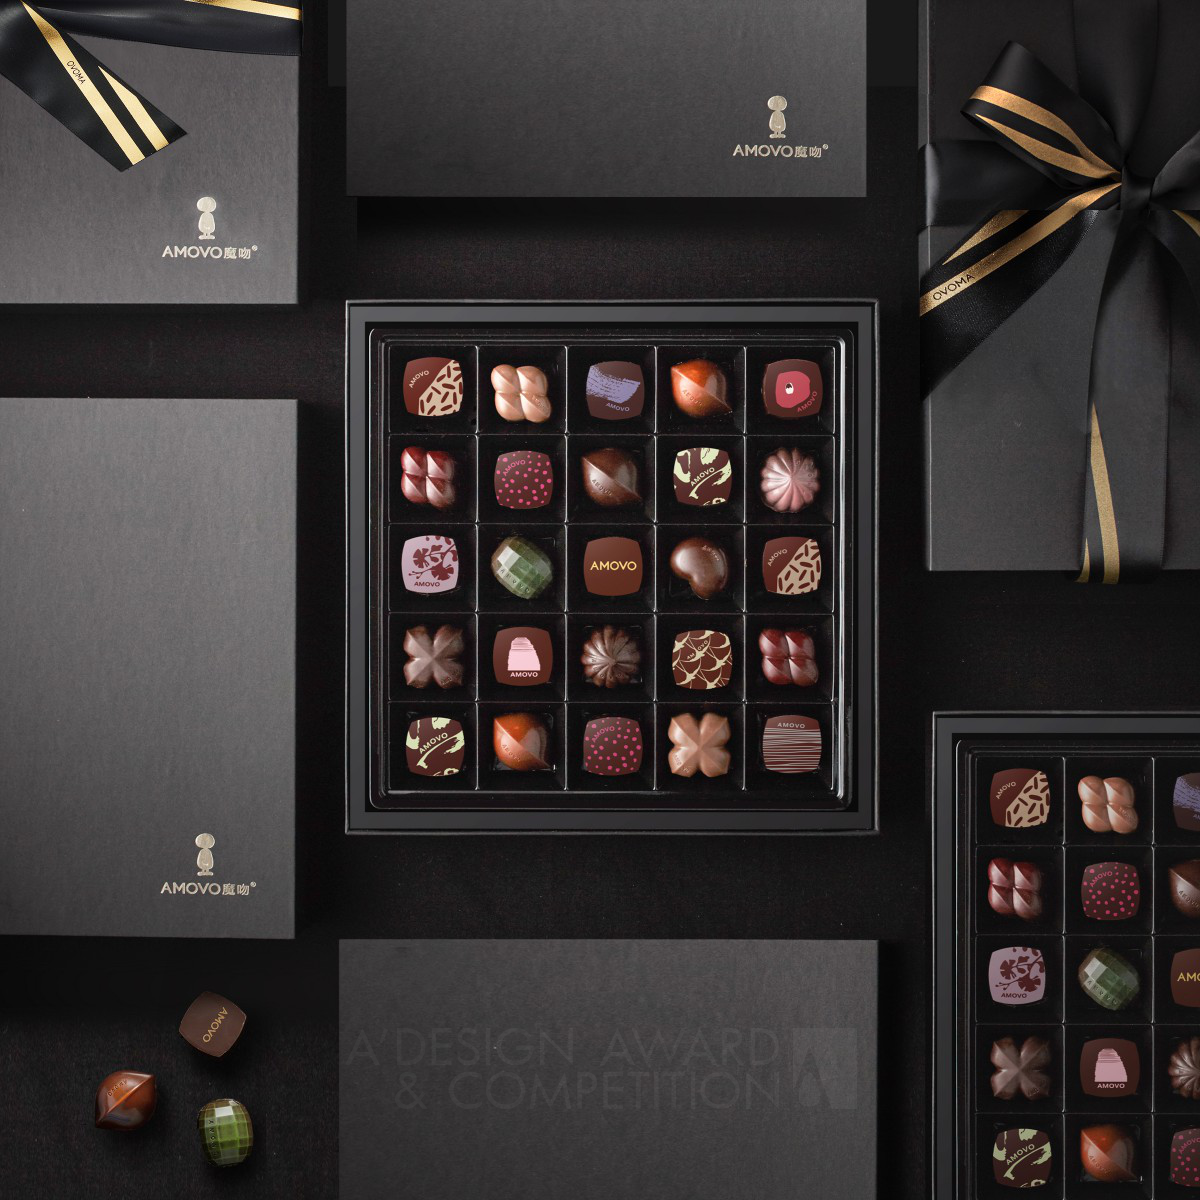 Xi Yang wins Silver at the prestigious A' Food, Beverage and Culinary Arts Design Award with Secret Garden Chocolate Gift.